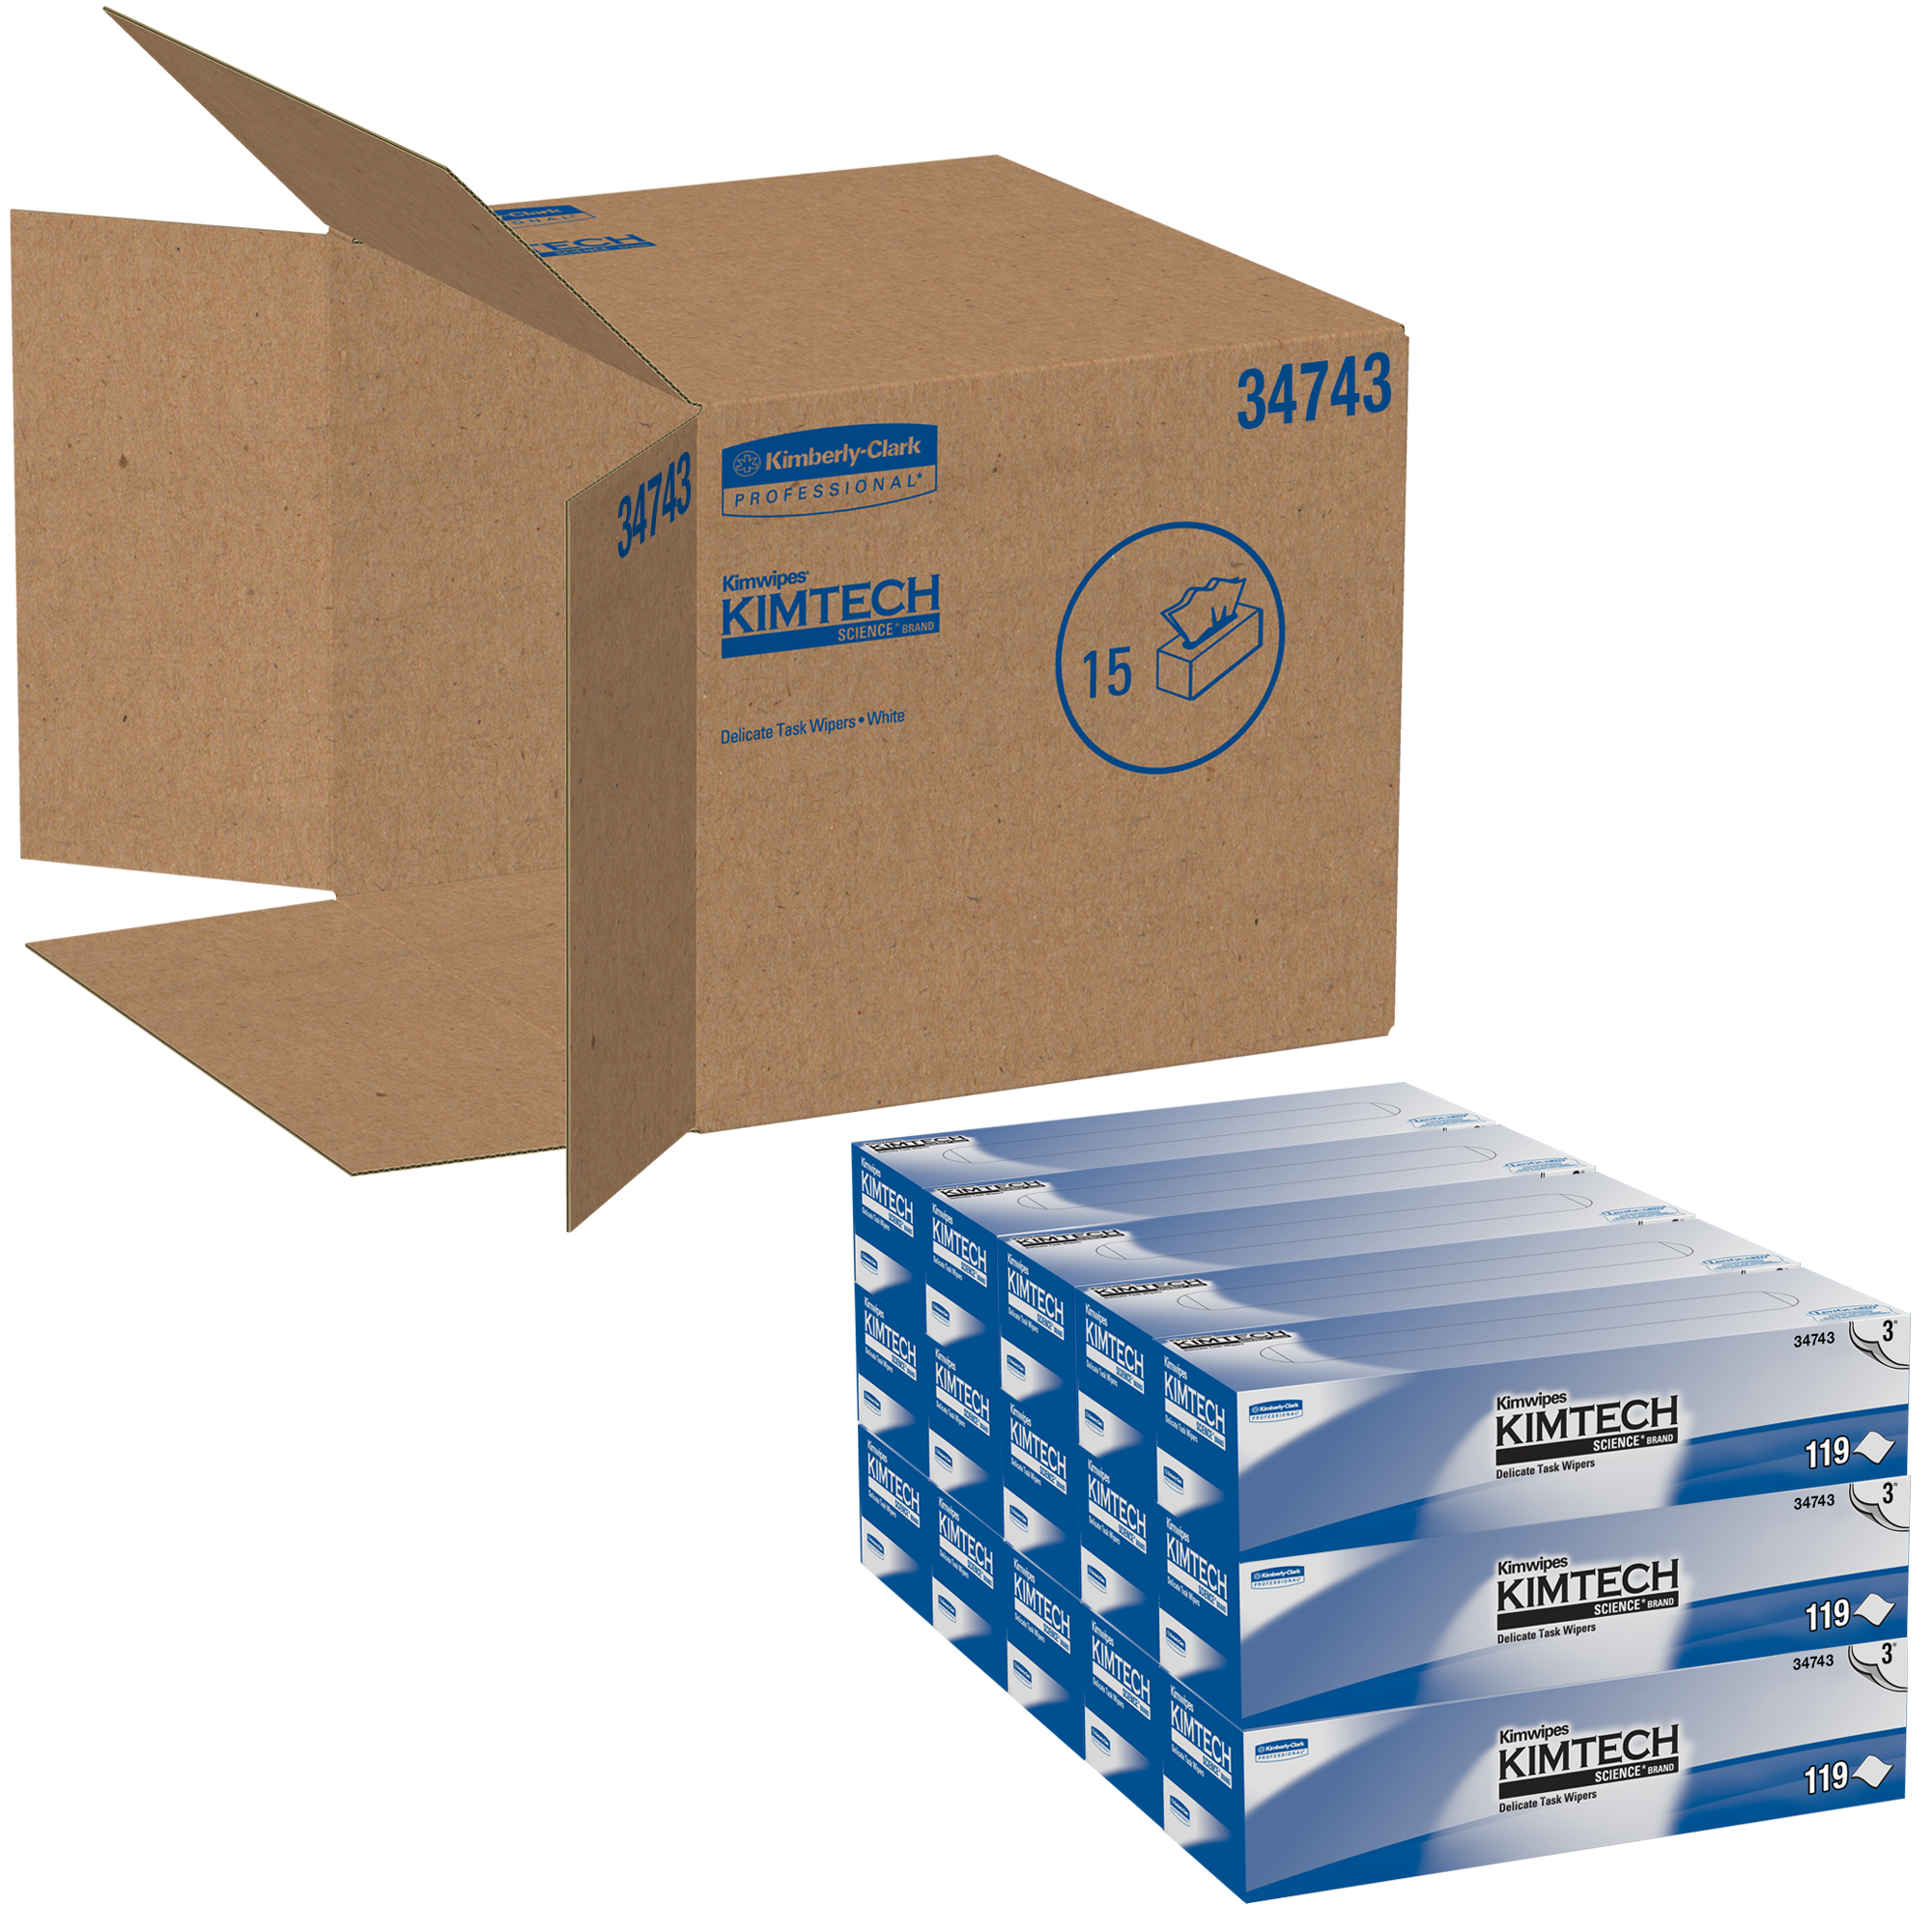 Picture of KIMWIPES Delicate Task Wipers, 3-Ply, 11 4/5 x 11 4/5, 119/Box, 15 Boxes/Carton